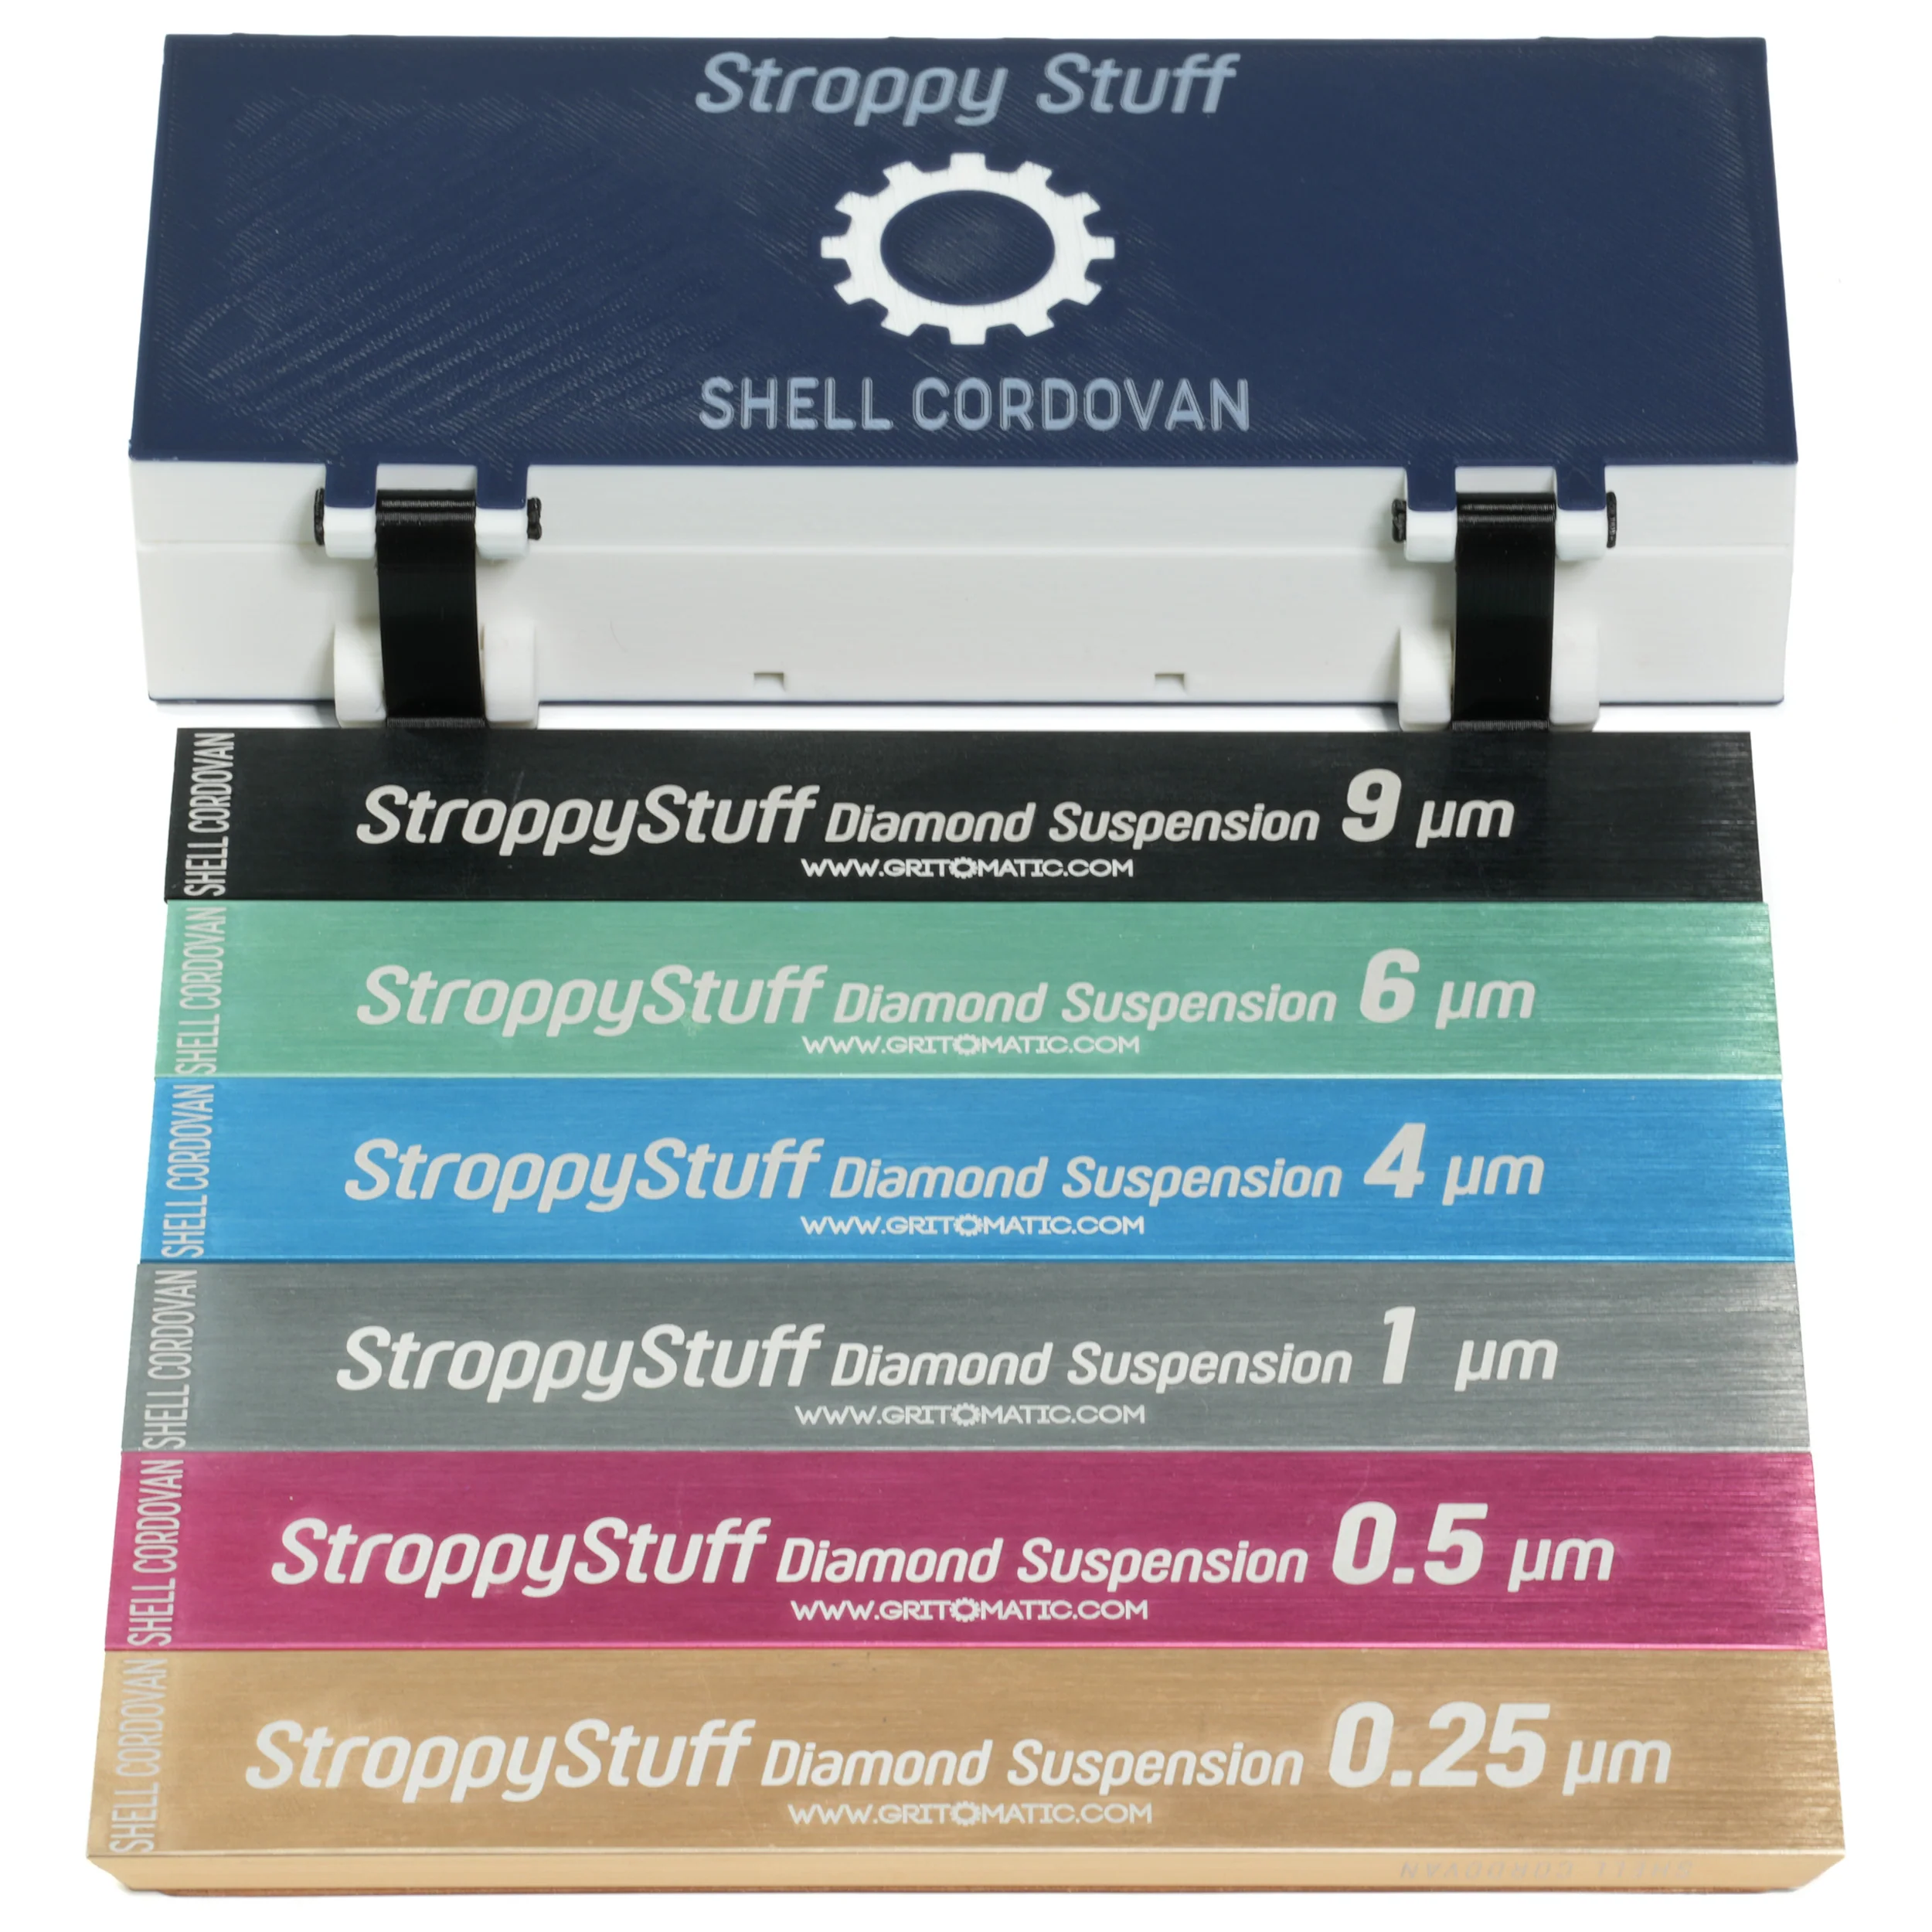 Multi-Color Strop Set - Shell Cordovan Leather for Stroppy Stuff [6" x 1"] Questions & Answers